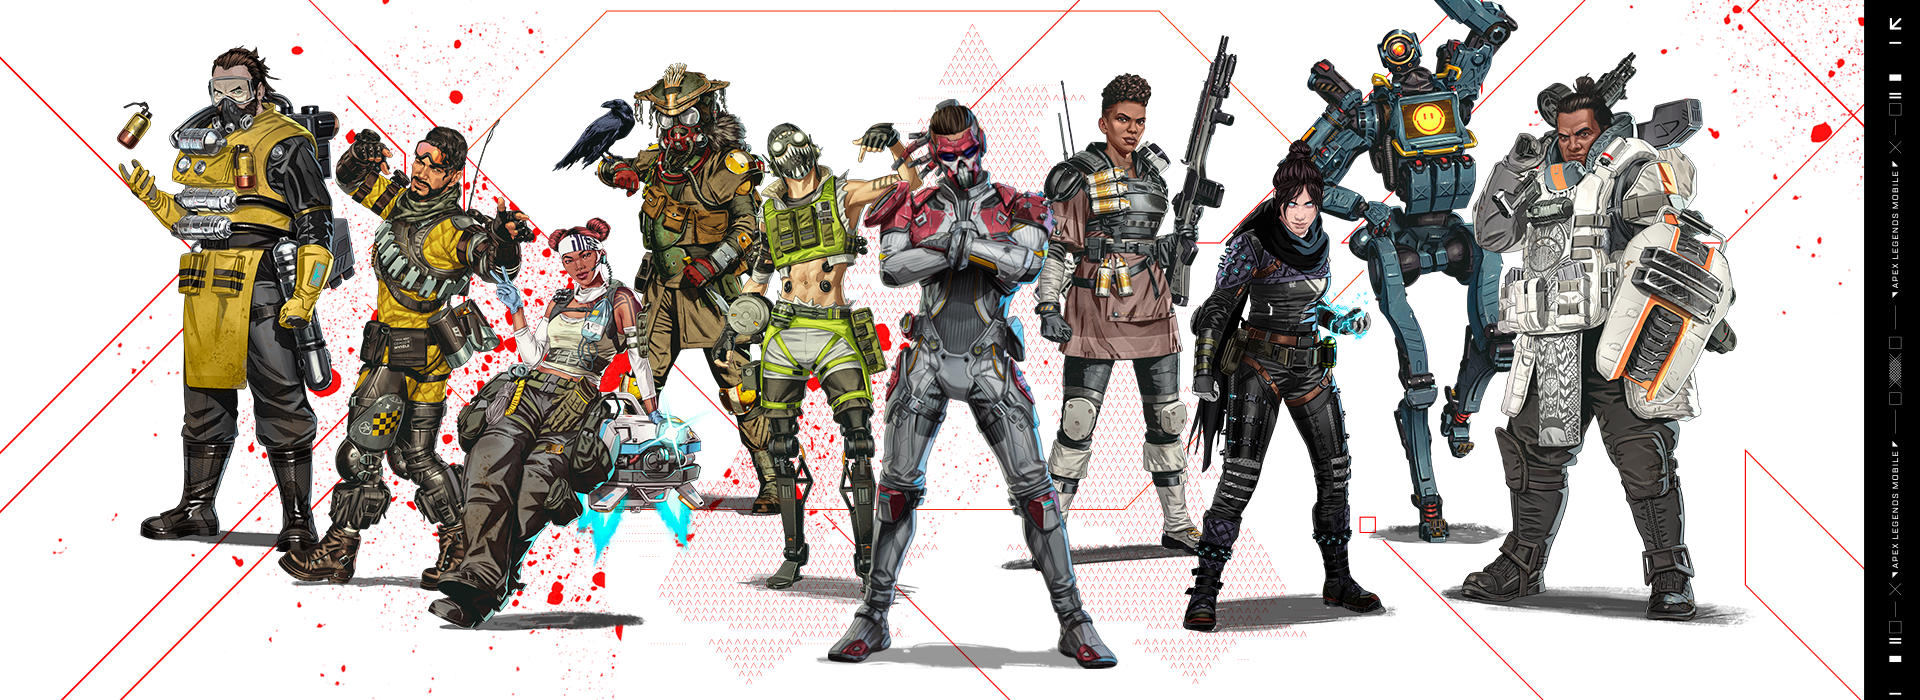 Apex Legends Mobile Characters: Are All Legends Coming to Mobile?